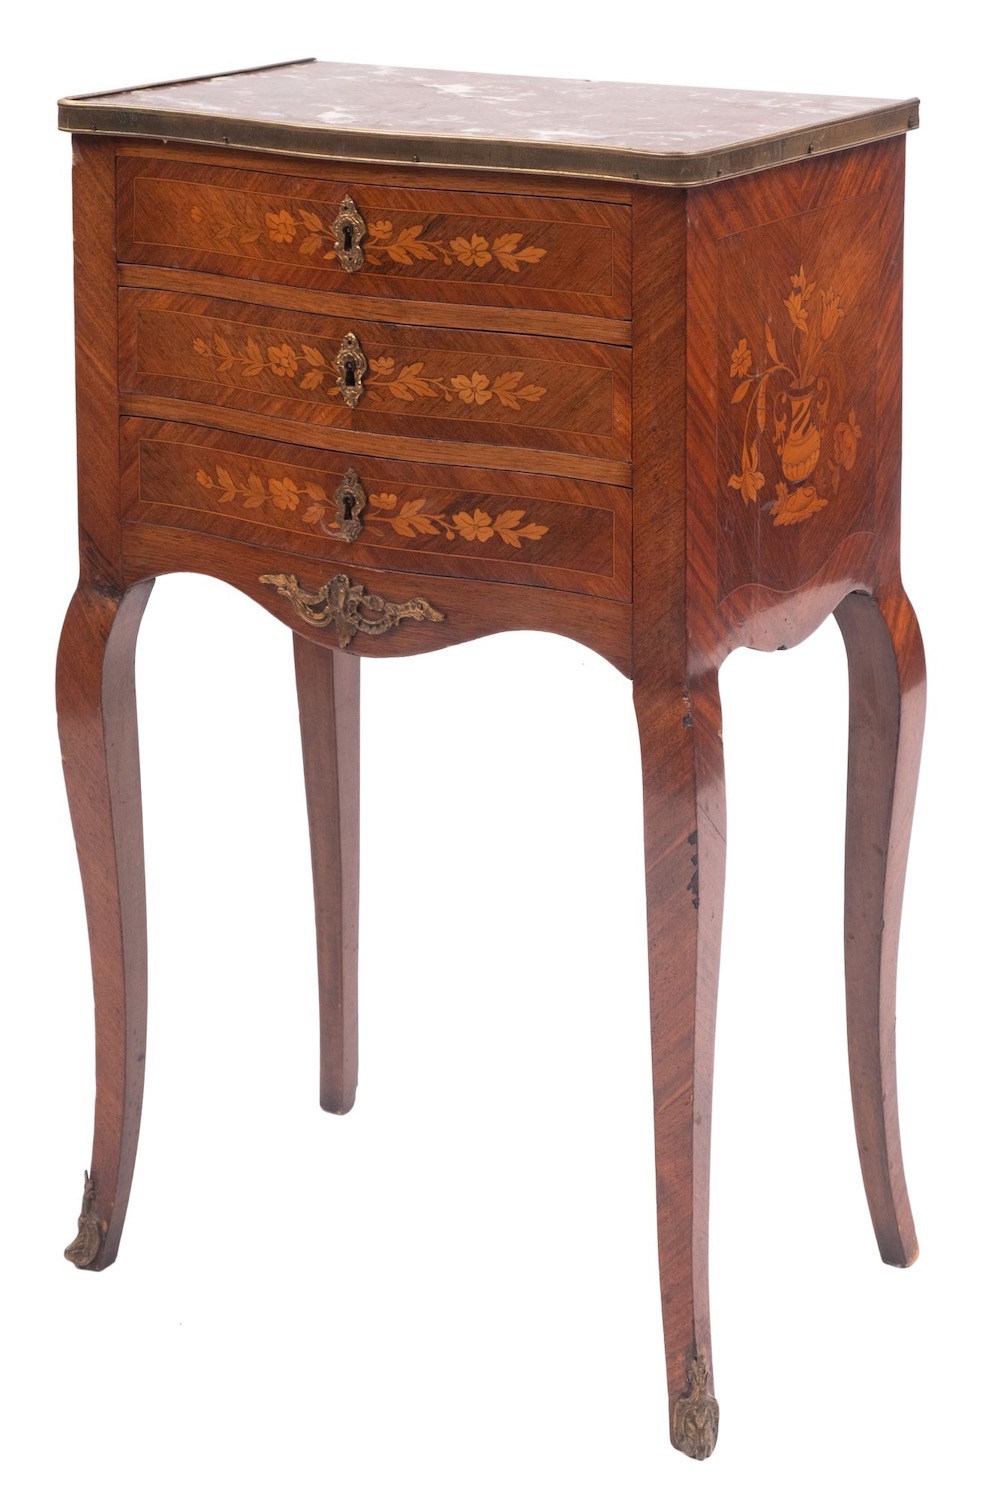 A kingwood, marquetry and marble topped petite commode in Louis XV taste, - Image 2 of 2